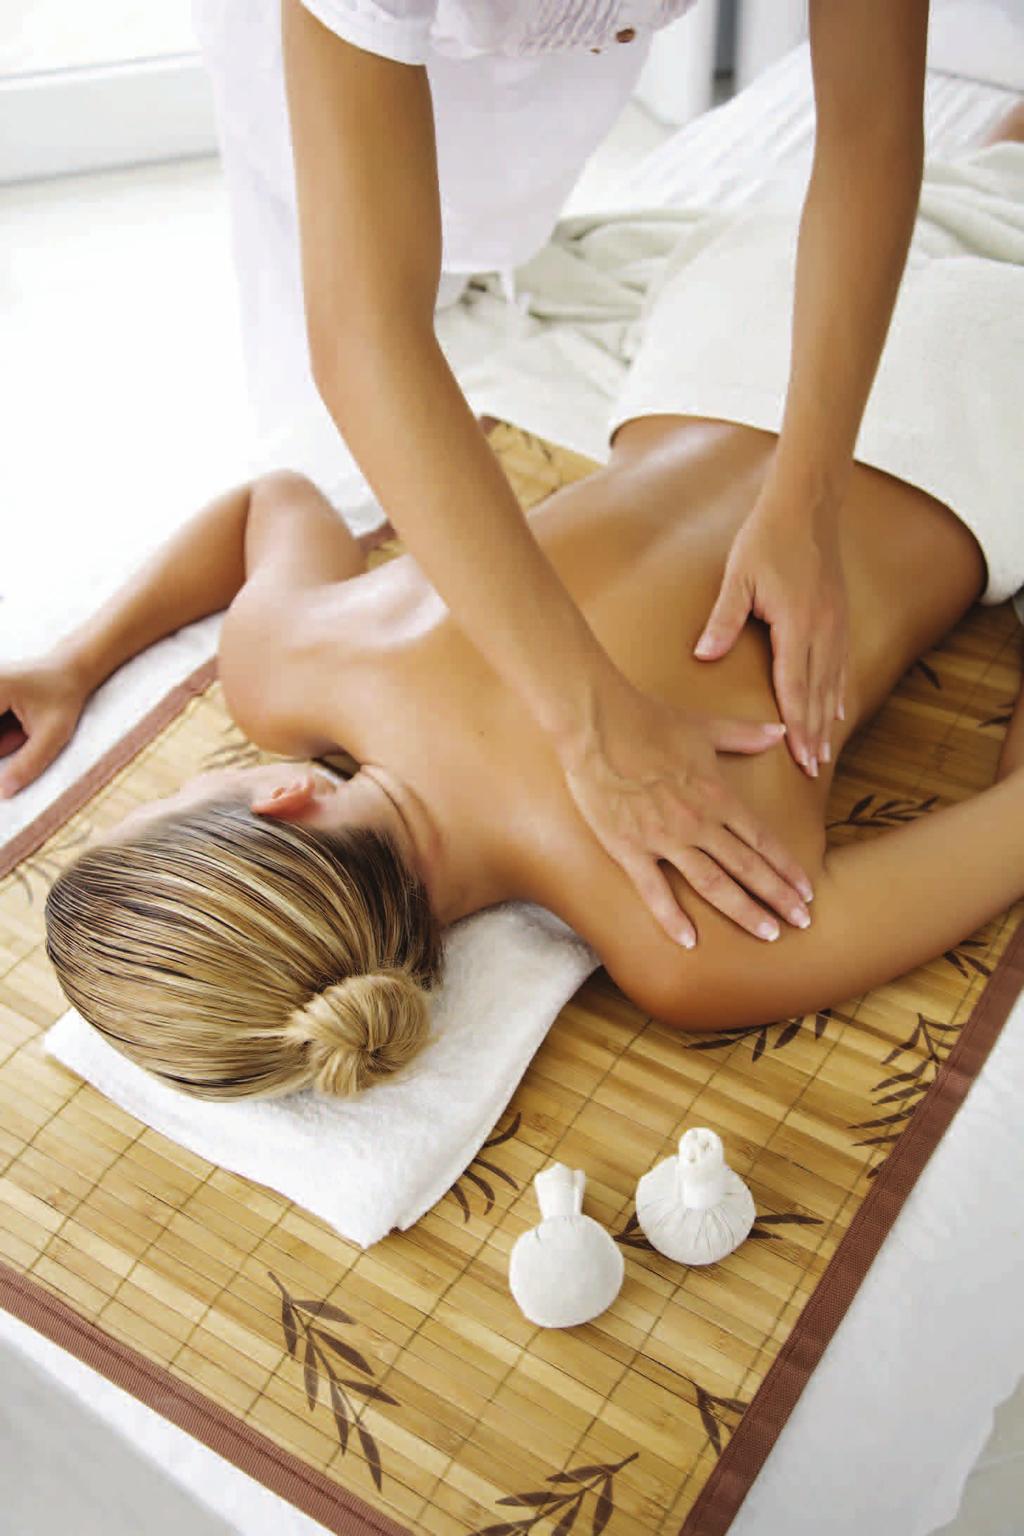 Whether you wish to feel relaxed, rejuvenated or energized, our